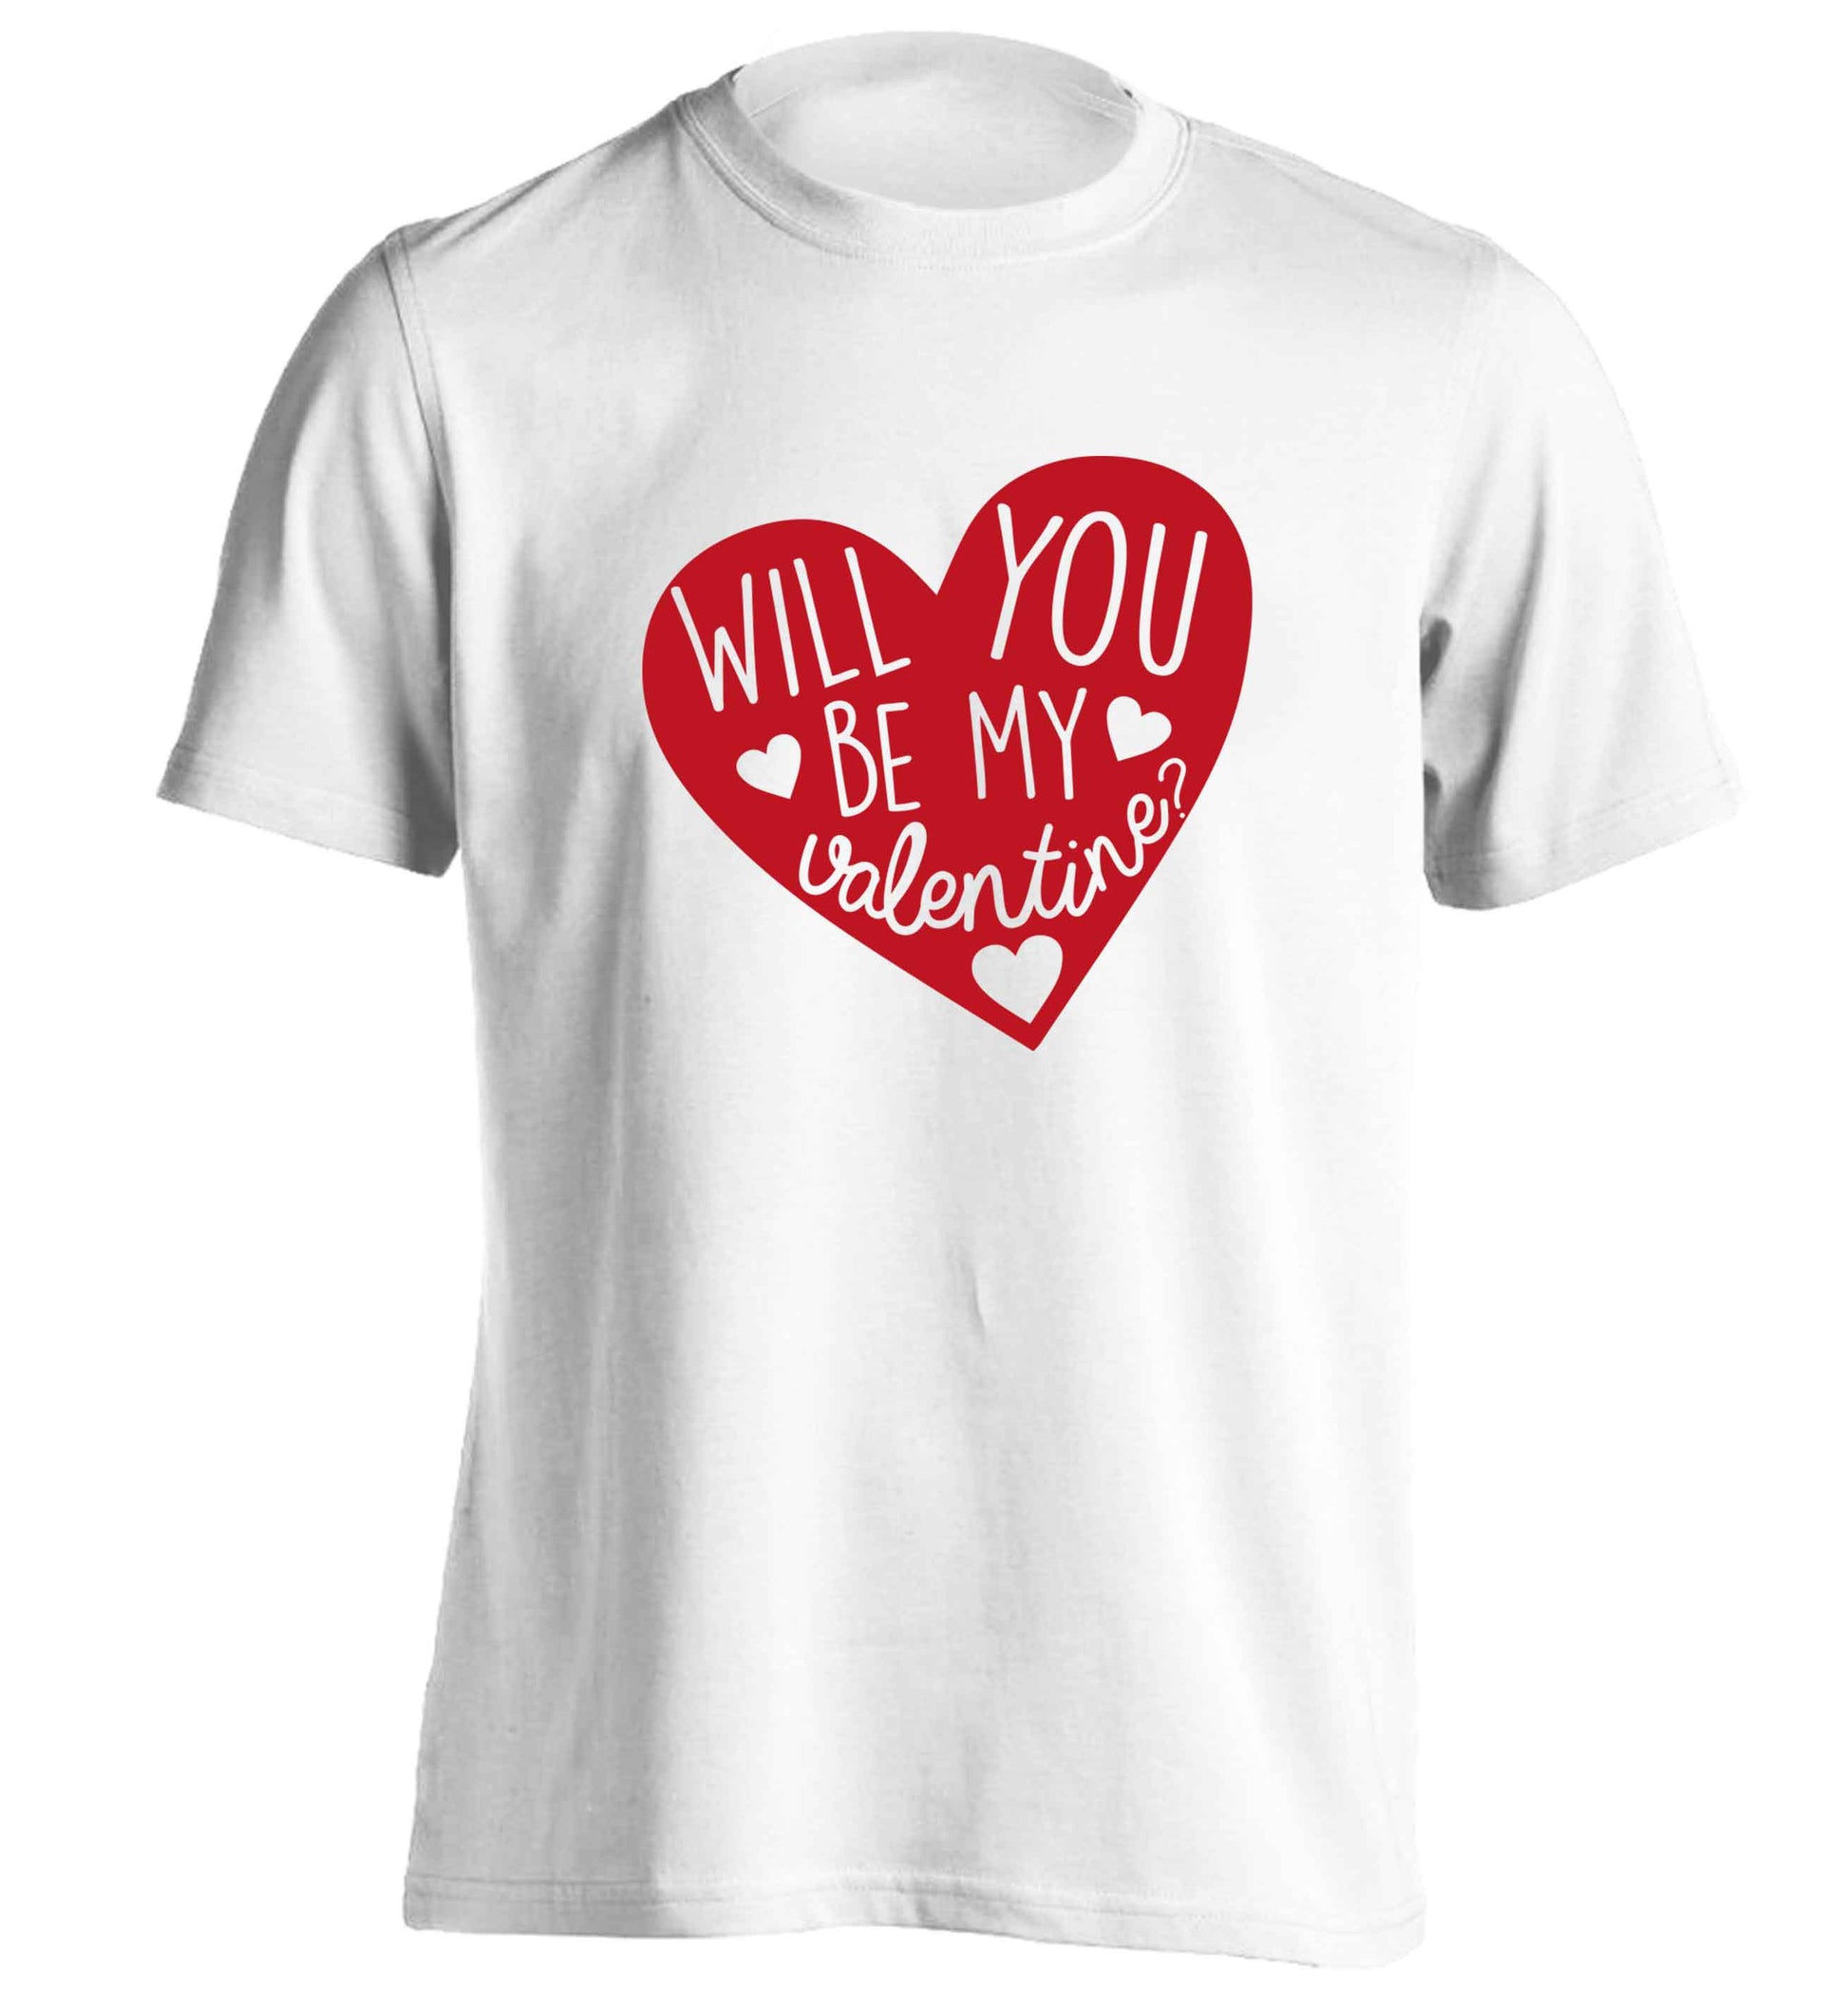 Will you be my valentine? adults unisex white Tshirt 2XL